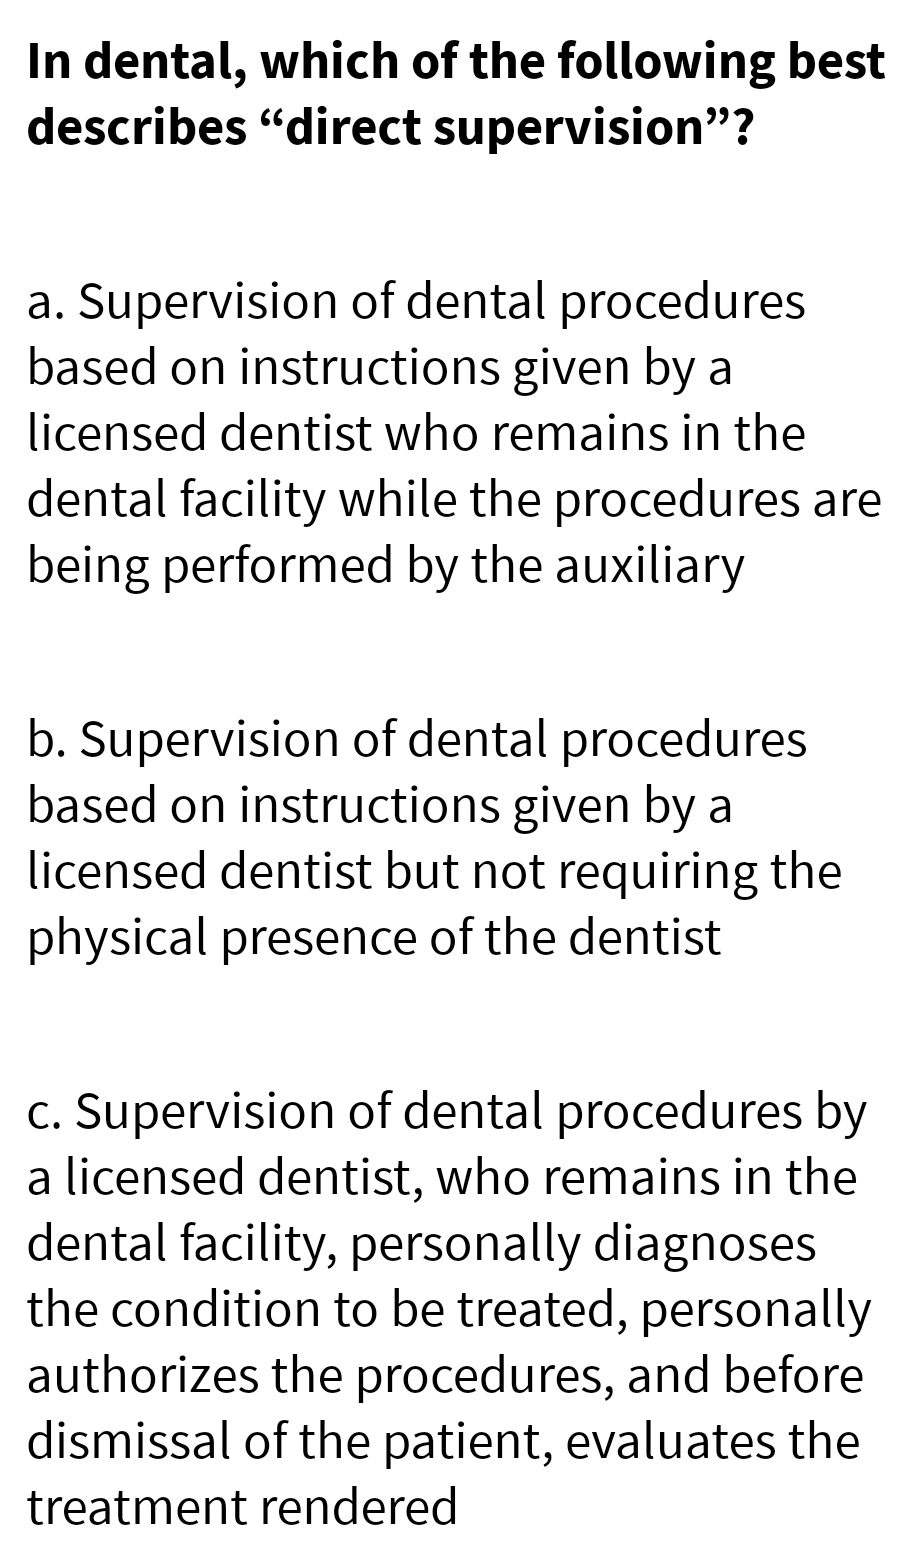 In dental, which of the following best
describes "direct supervision"?
a. Supervision of dental procedures
based on instructions given by a
licensed dentist who remains in the
dental facility while the procedures are
being performed by the auxiliary
b. Supervision of dental procedures
based on instructions given by a
licensed dentist but not requiring the
physical presence of the dentist
c. Supervision of dental procedures by
a licensed dentist, who remains in the
dental facility, personally diagnoses
the condition to be treated, personally
authorizes the procedures, and before
dismissal of the patient, evaluates the
treatment rendered